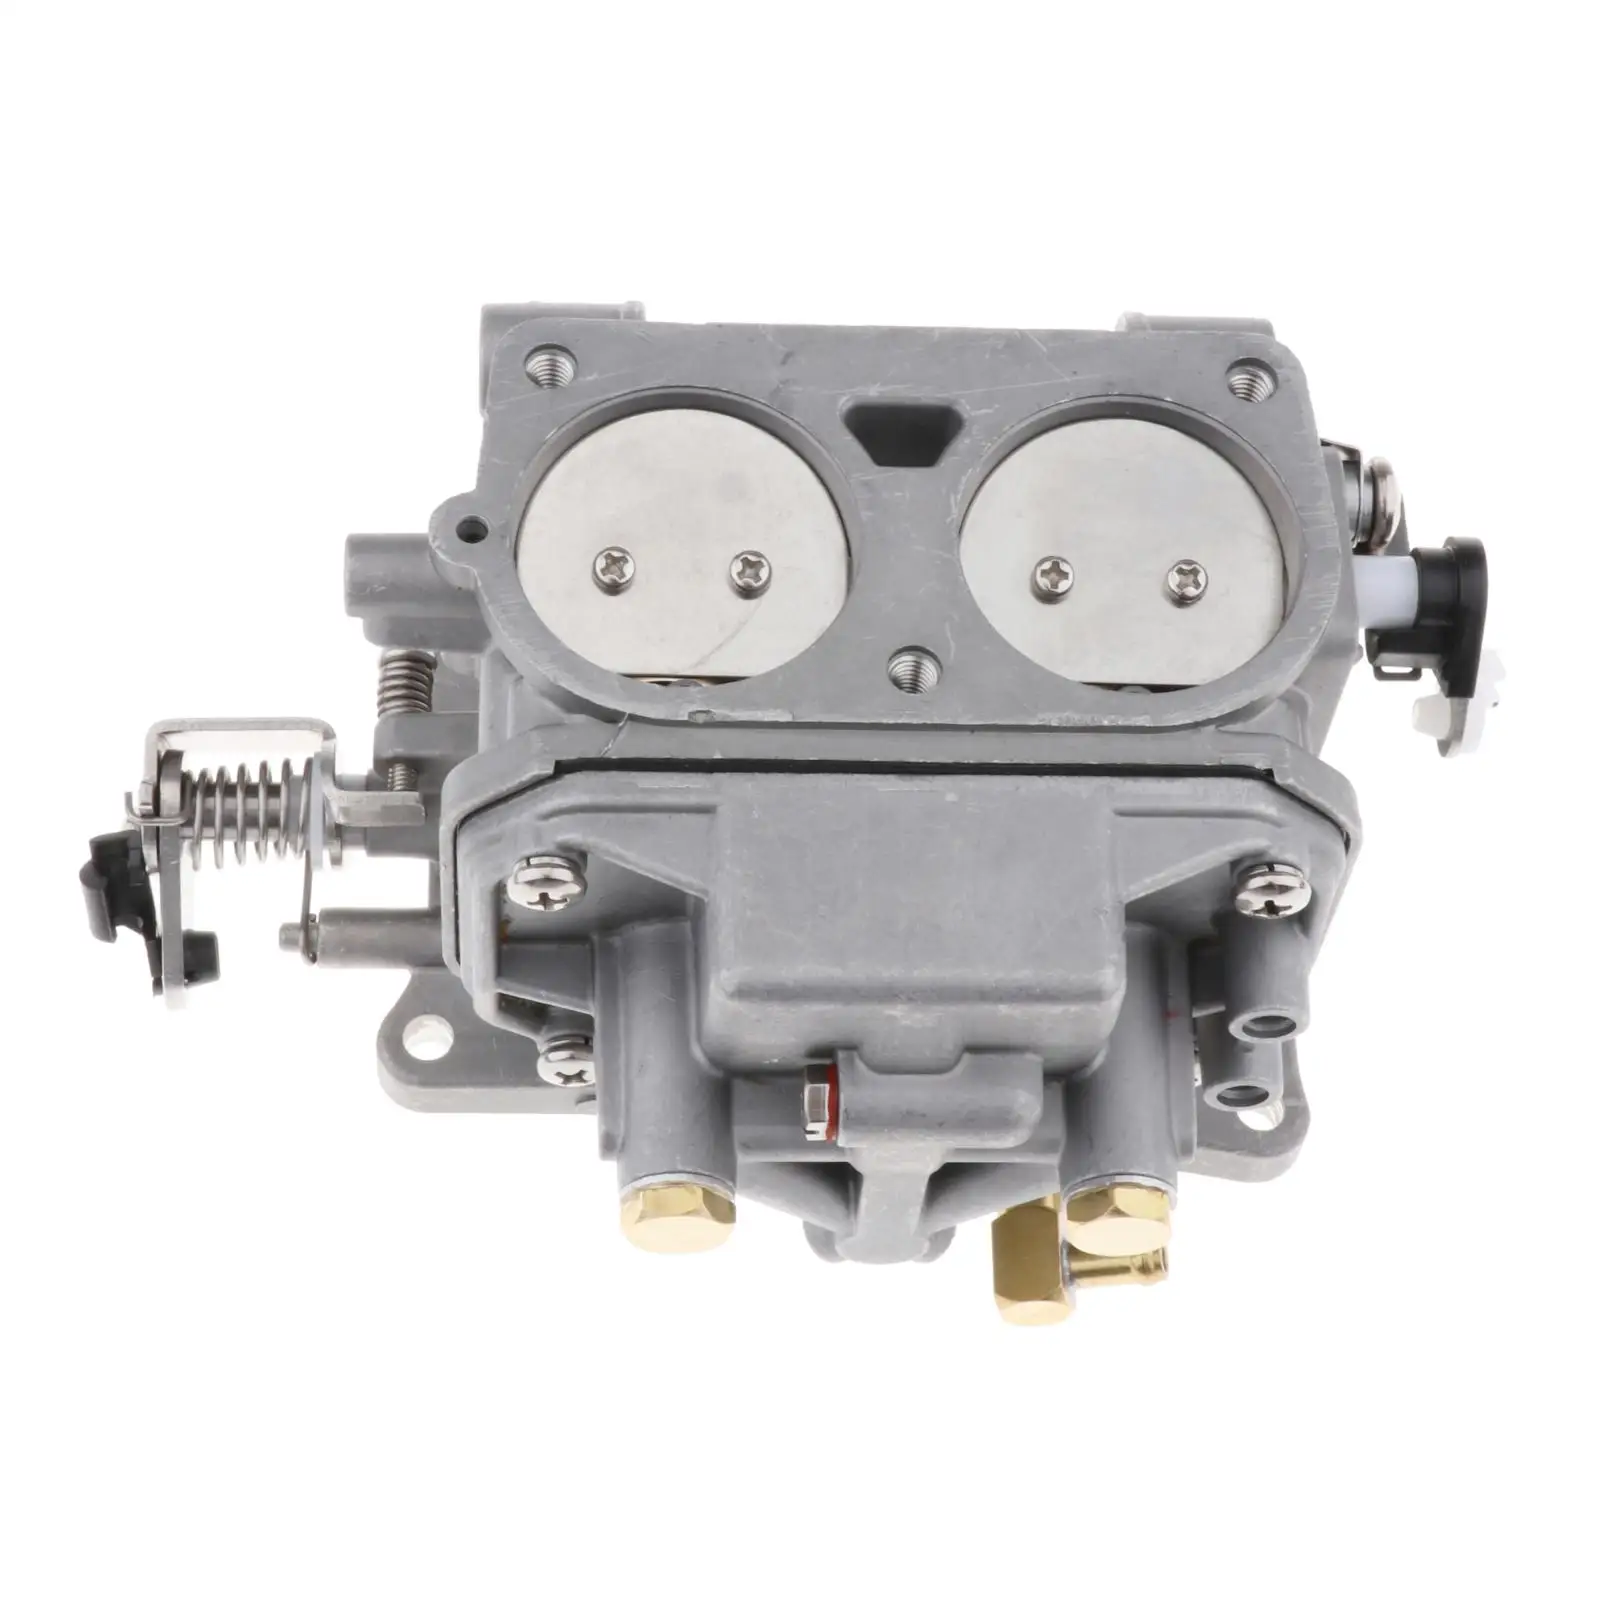 Boat Motor Carburetor Carb Assy For Yamaha 40HP J 1986-1993 For Chinese Parsun T36J T40J 2 Stroke 6F5-14301-00